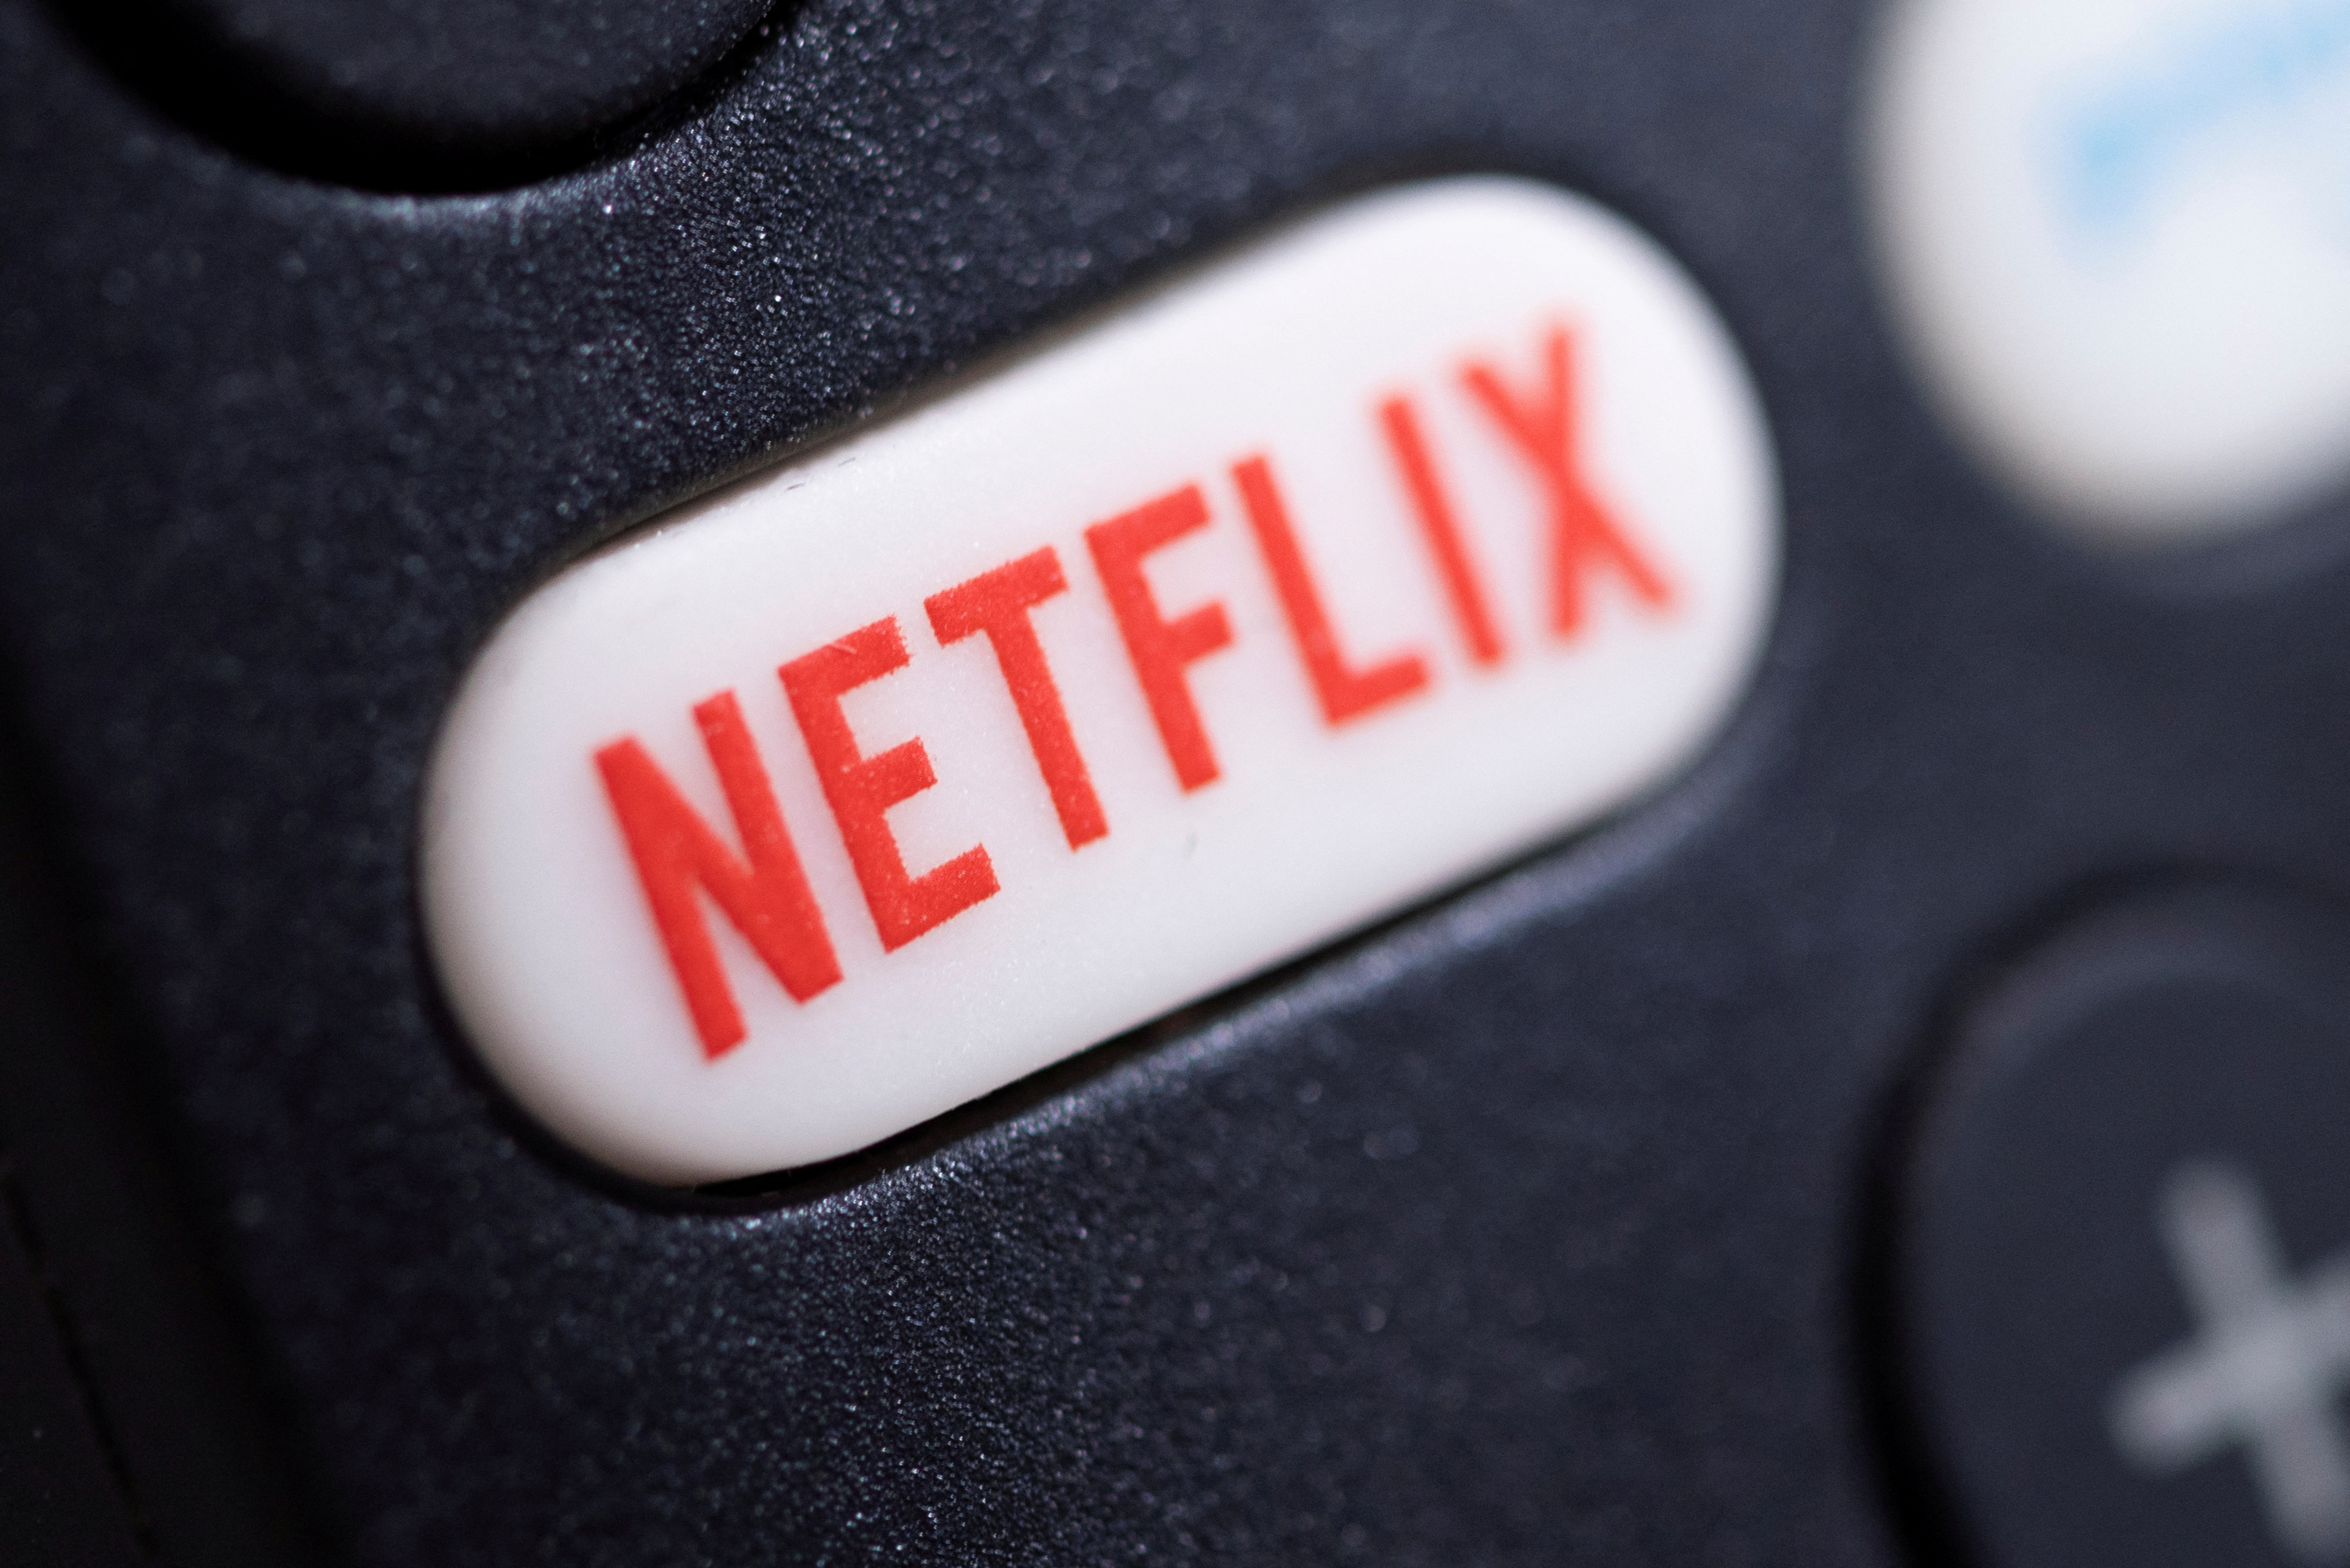 FILE PHOTO: The Netflix logo is seen on a TV remote controller, in this illustration taken January 20, 2022. REUTERS/Dado Ruvic/Illustration/File Photo